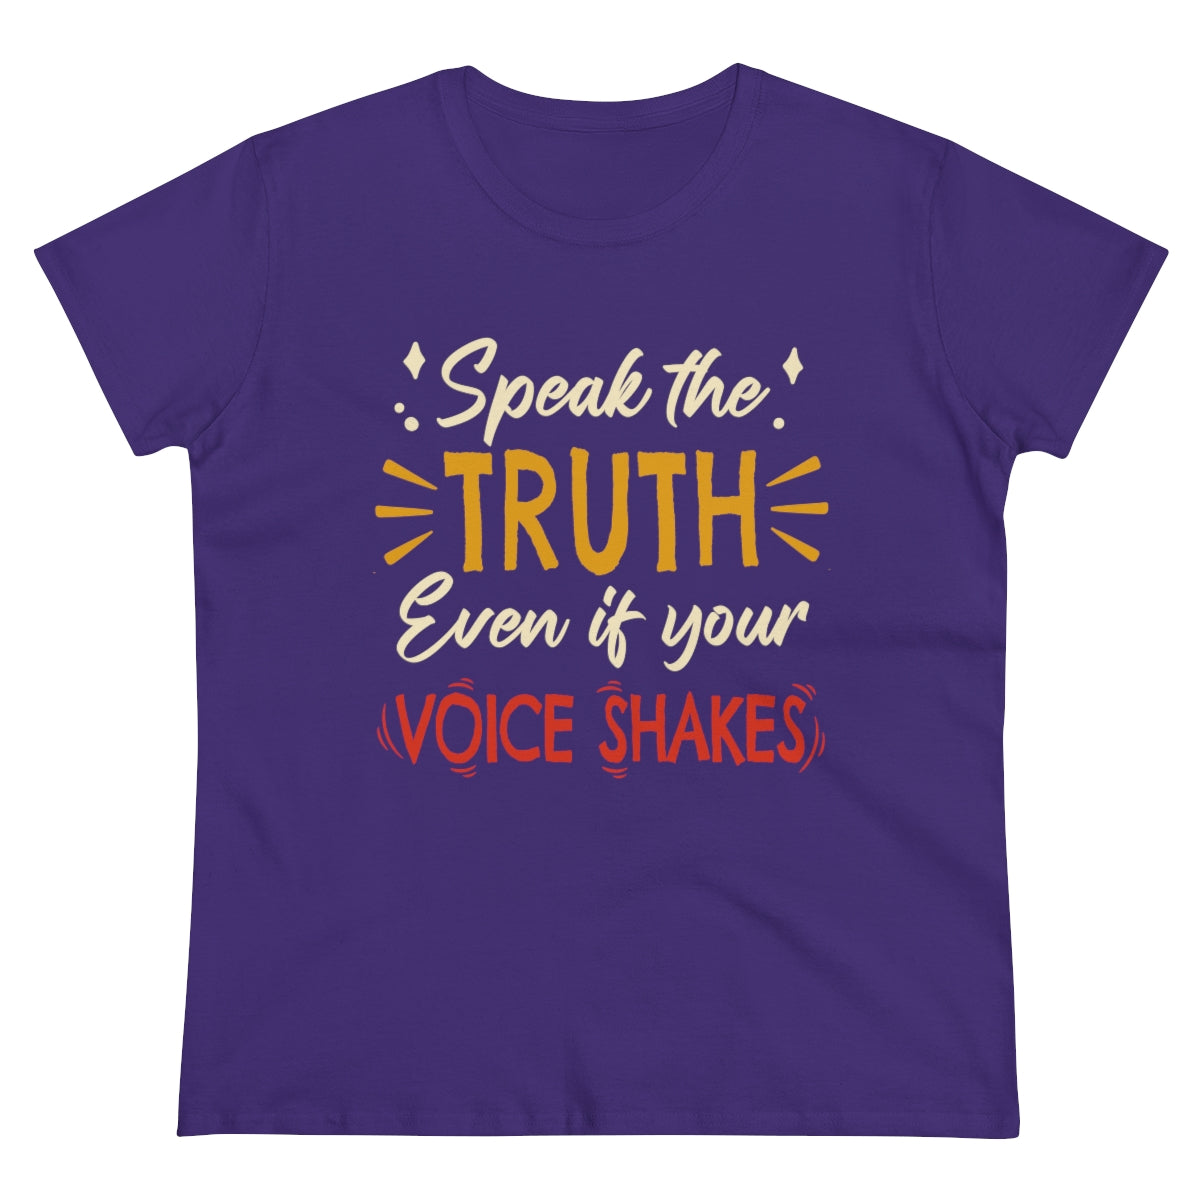 Speak The Truth Even If Your Voice Shakes | Women's Tee - Rise of The New Media